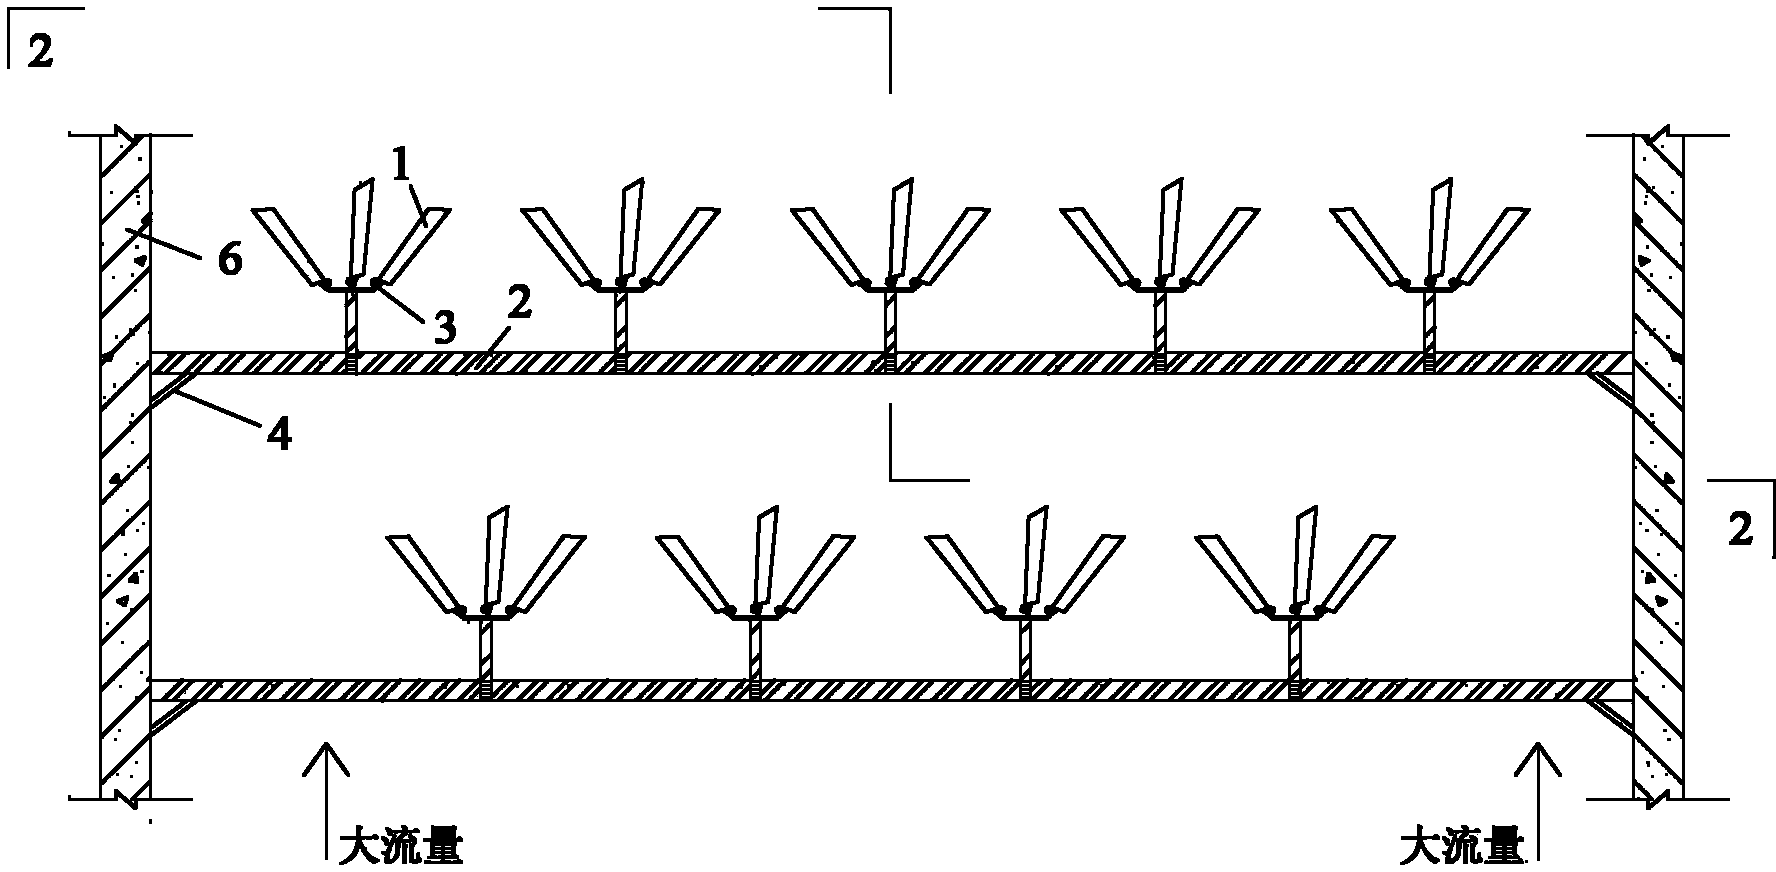 Flocculation reaction framed bent device equipped with flexibly-connected impellers